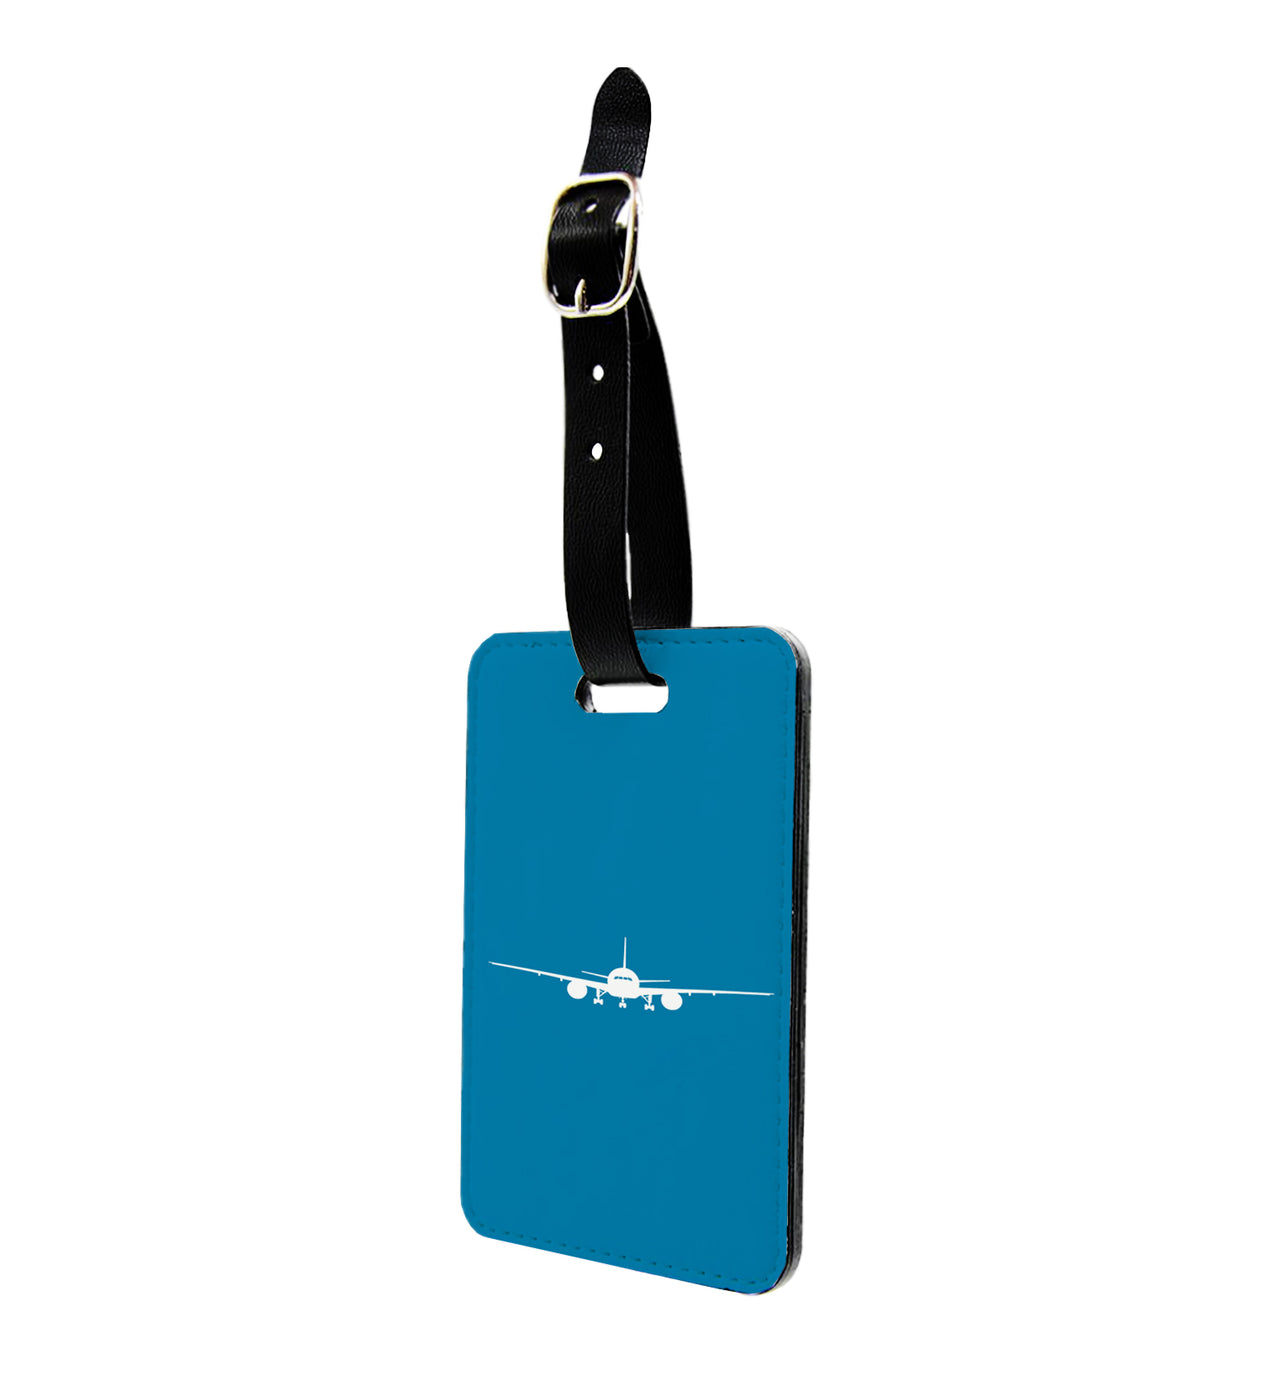 Boeing 777 Silhouette Designed Luggage Tag